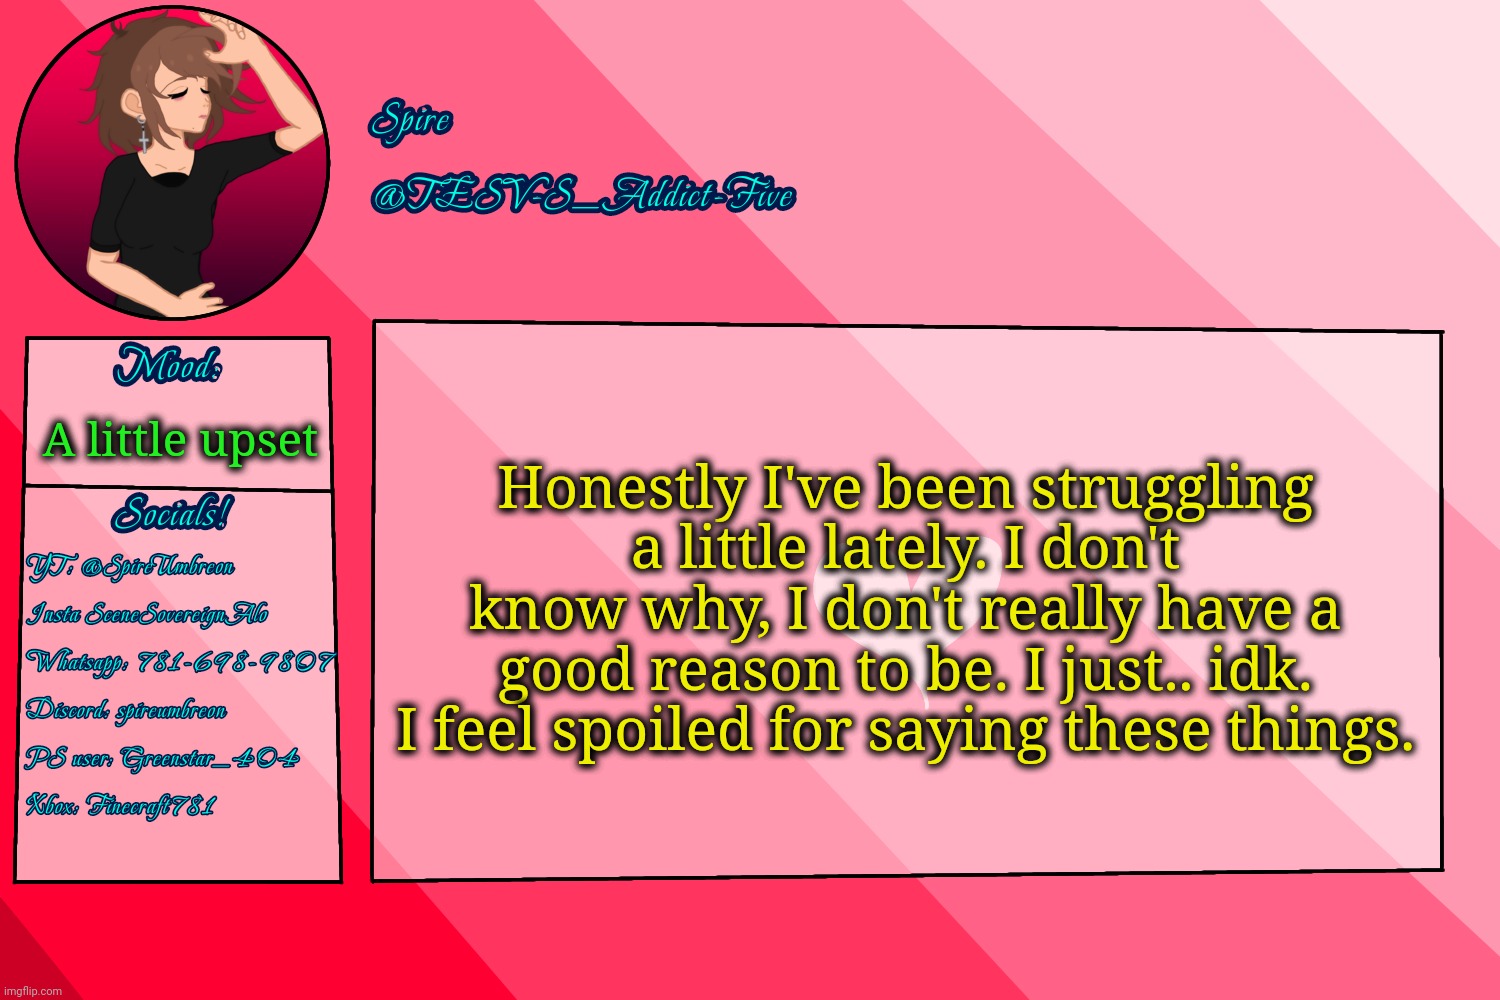 . | Honestly I've been struggling a little lately. I don't know why, I don't really have a good reason to be. I just.. idk. I feel spoiled for saying these things. A little upset | image tagged in tesv-s_addict-five announcement template | made w/ Imgflip meme maker